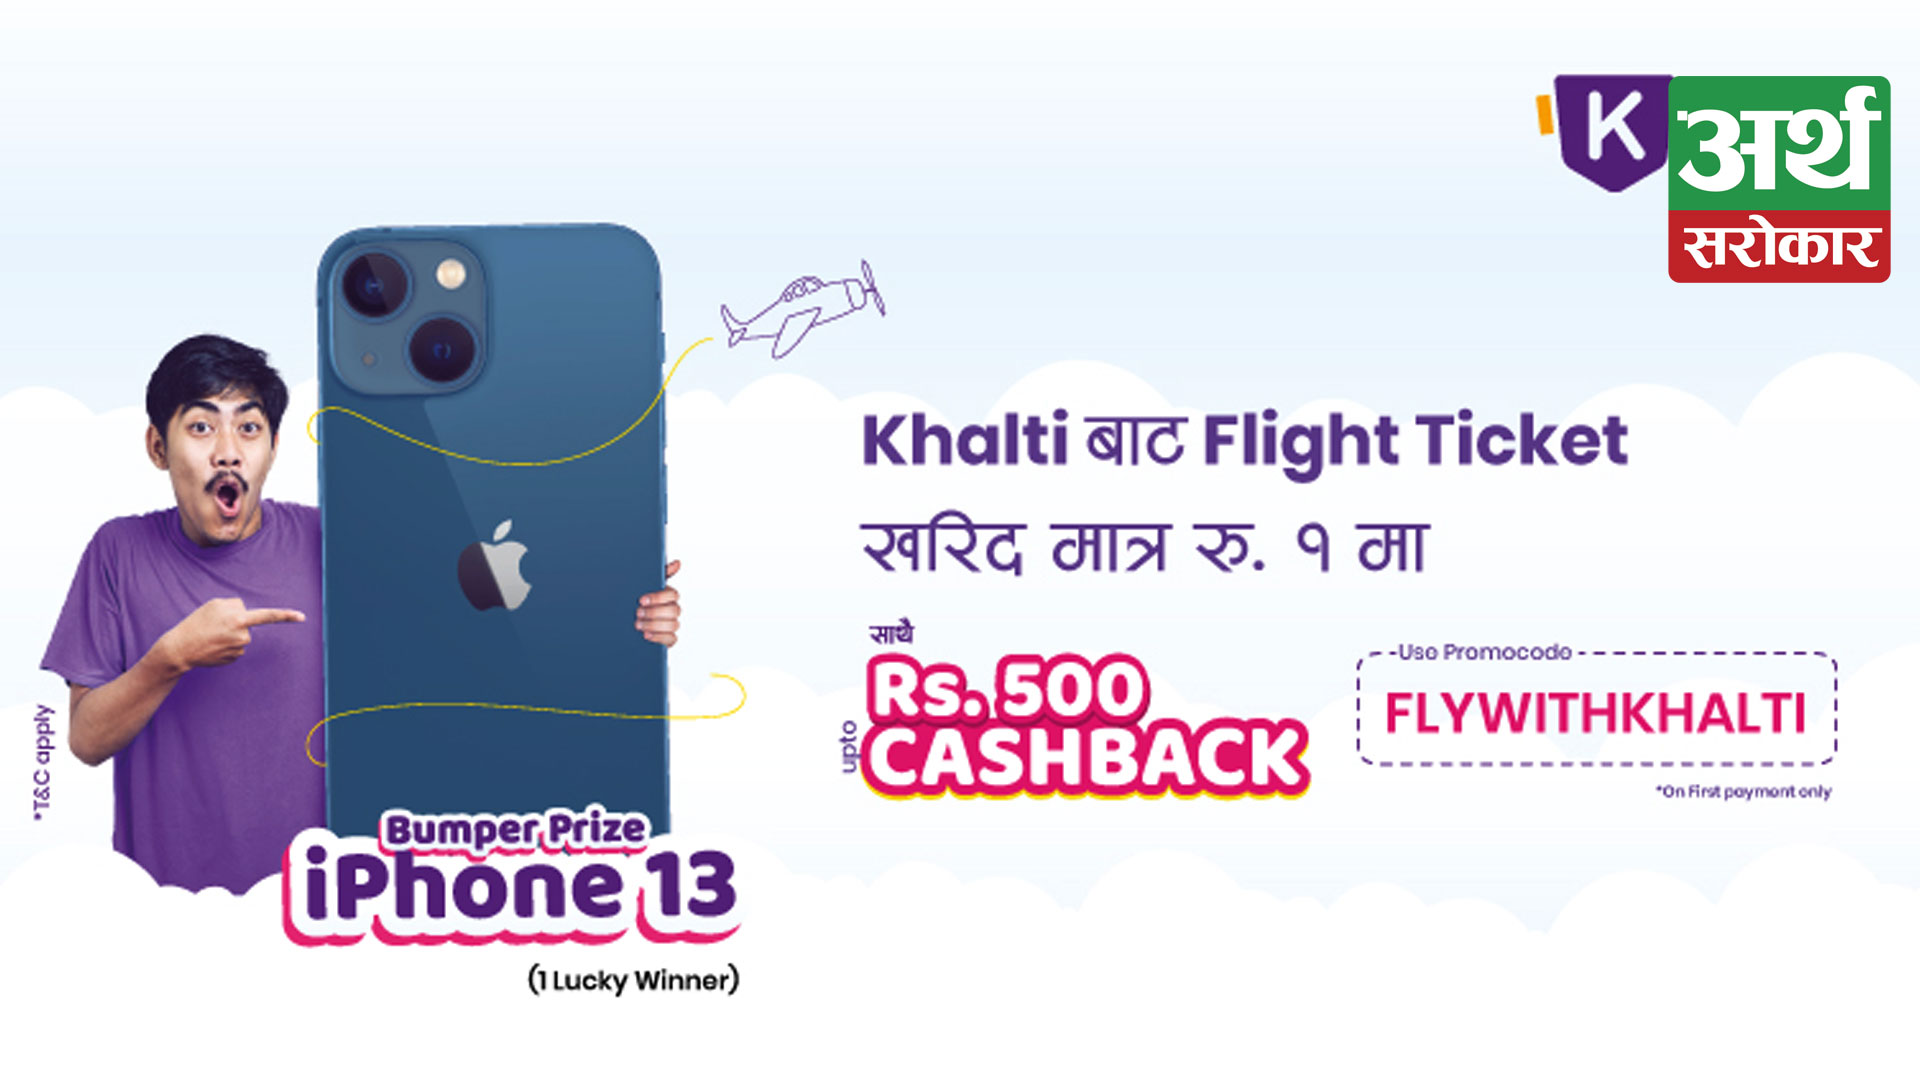 Khalti brings a chance to win a flight ticket at Re. 1 and iPhone 13.